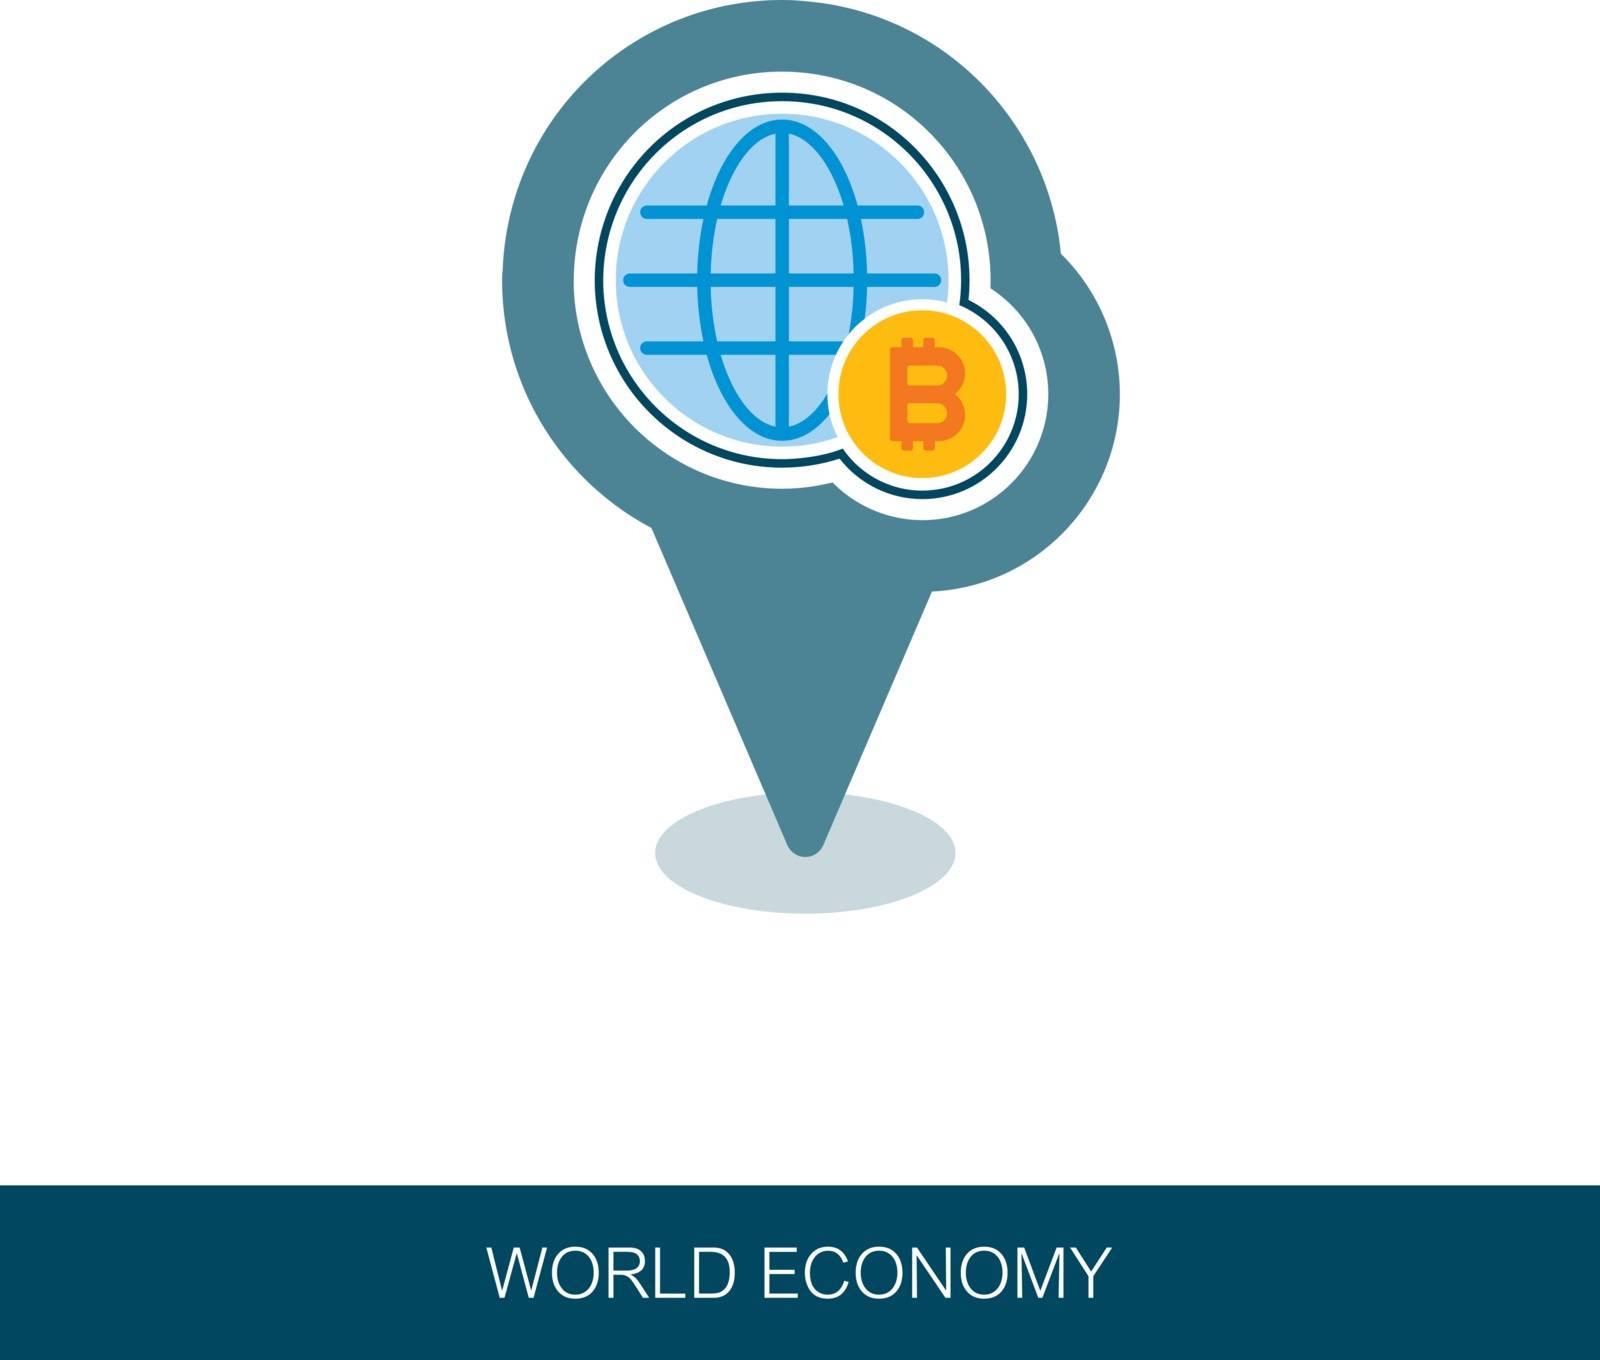 Global economy pin map icon, financial and money concept. Map pointer. Map markers. Vector design of blockchain technology, bitcoin, altcoins, cryptocurrency mining, finance, digital money market